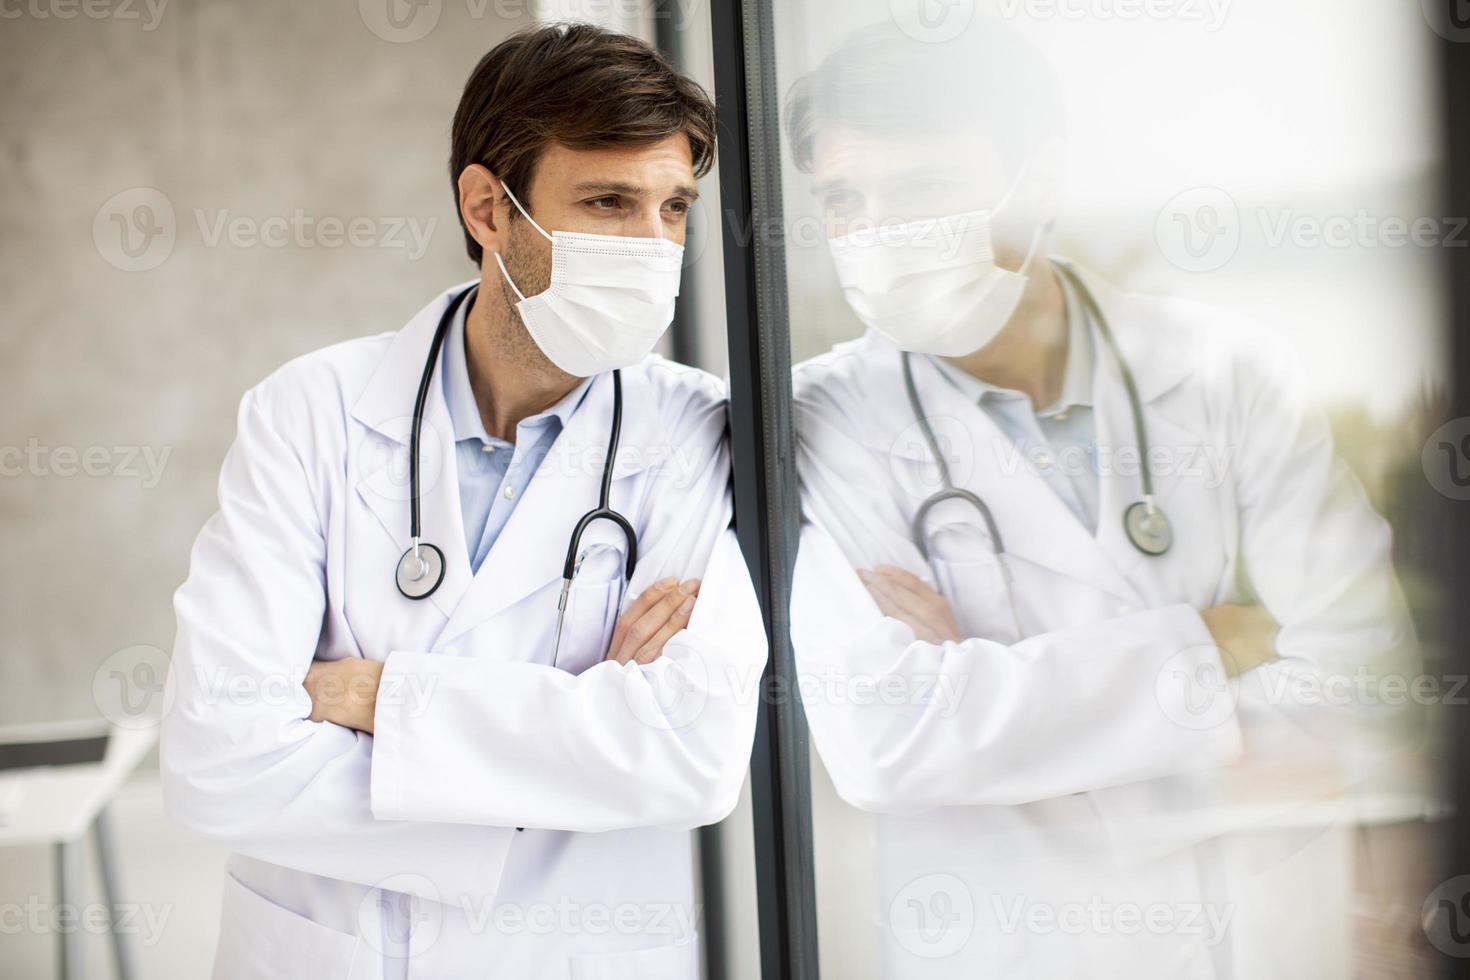 Doctor wearing a mask with reflection in a window photo